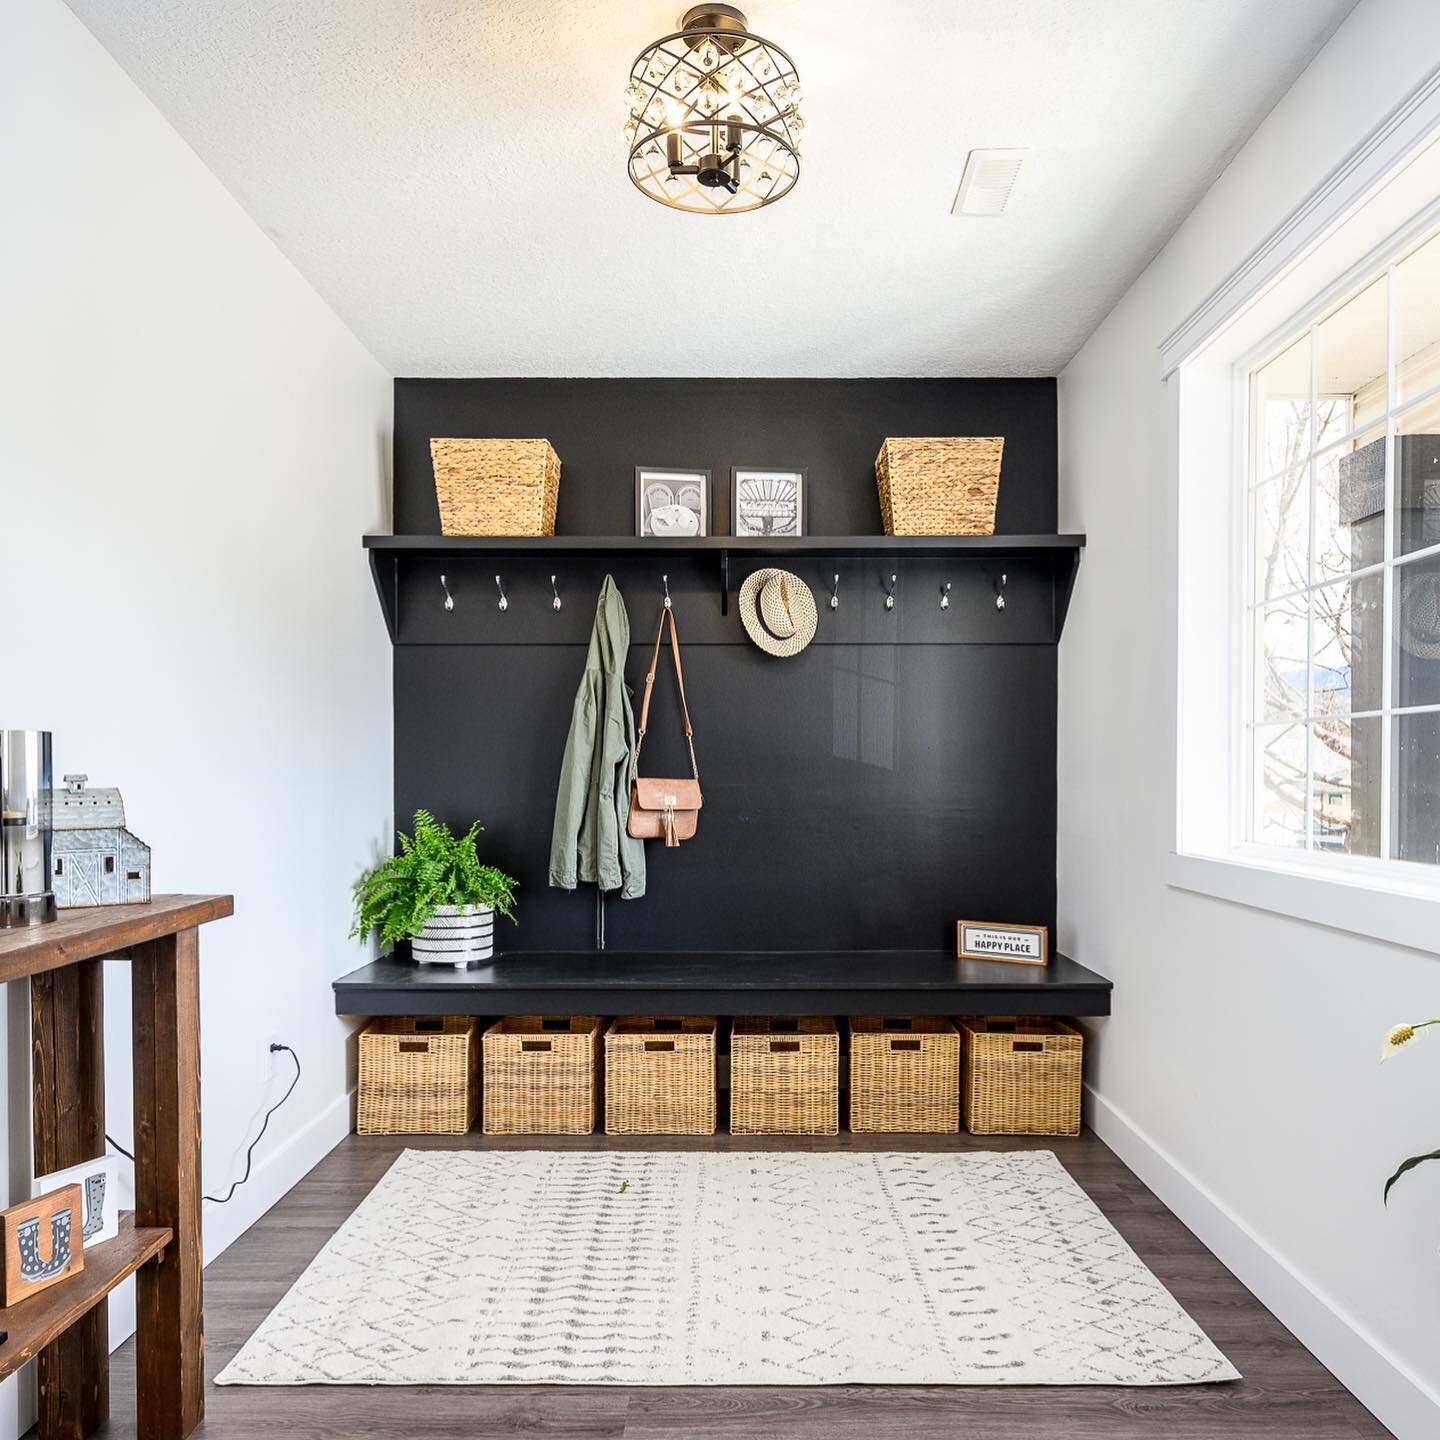 Get organized! Stage your home . 
This awesome listing from @tim.j.sharp 

#realestate 
#okanaganrealestate 
#vernonrealestate 
#foothills 
#realestatephotography
#staging 
#bedroomstyling 
#entrywaydecor 
#organization 
#realtor
#okanaganrealtor
#en